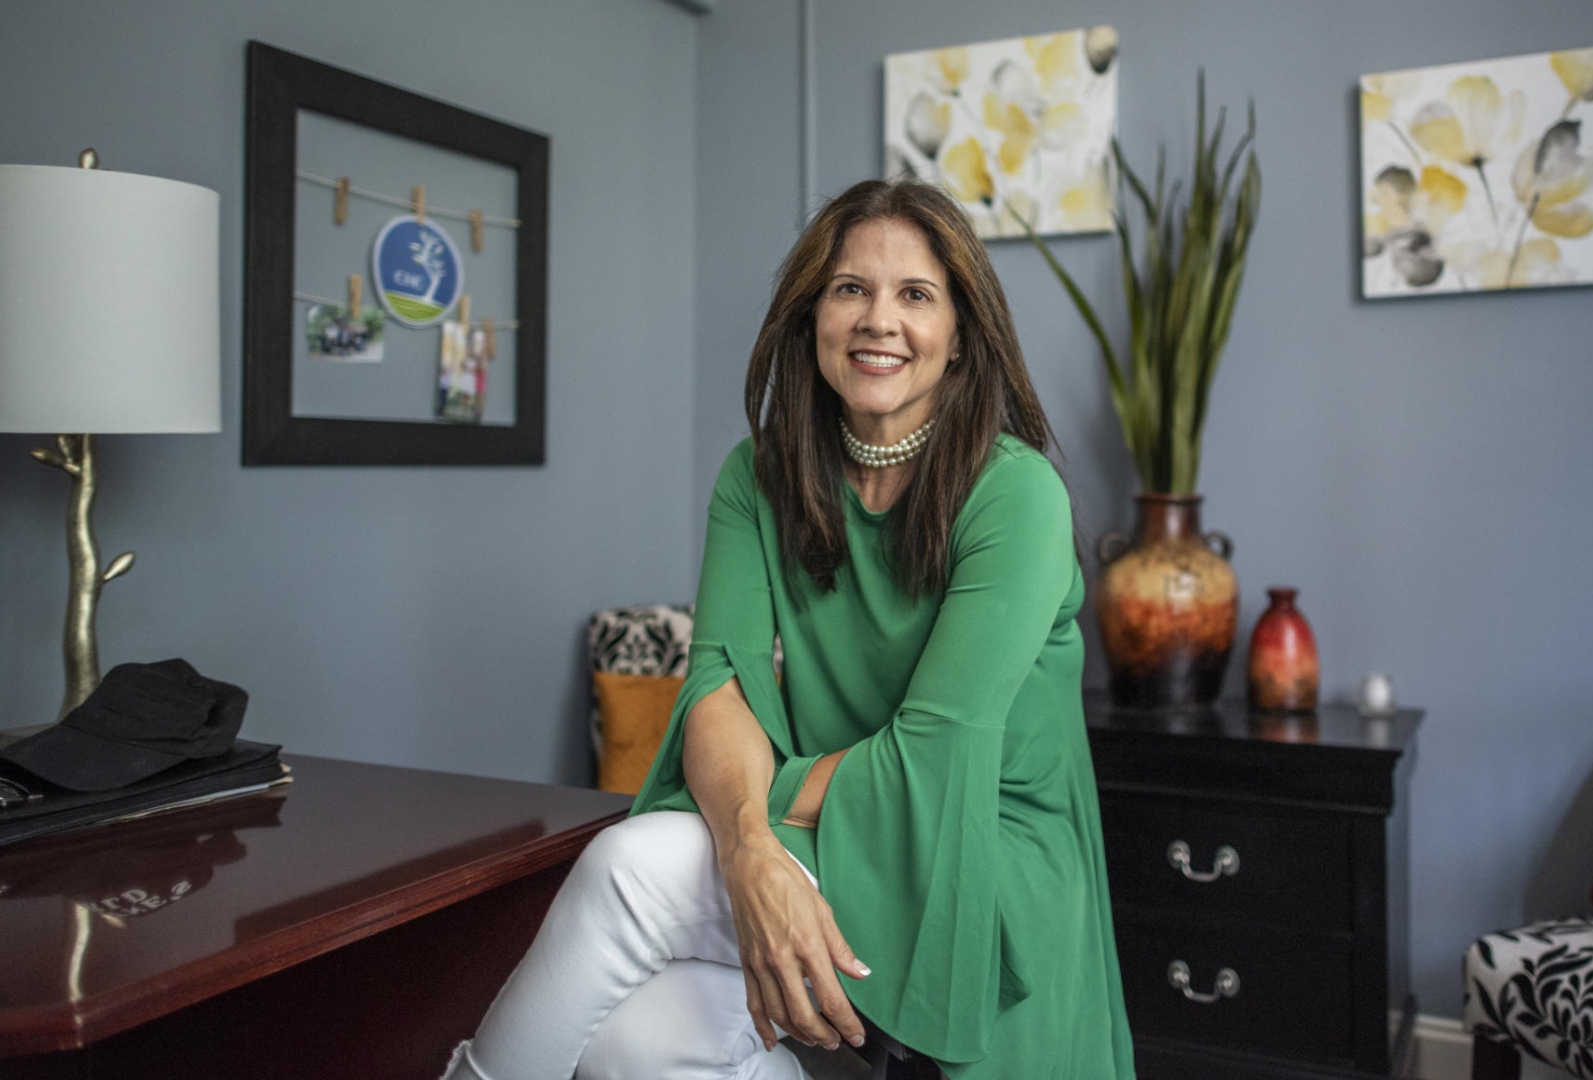 Stephanie Bianco poses for a portrait in her office.